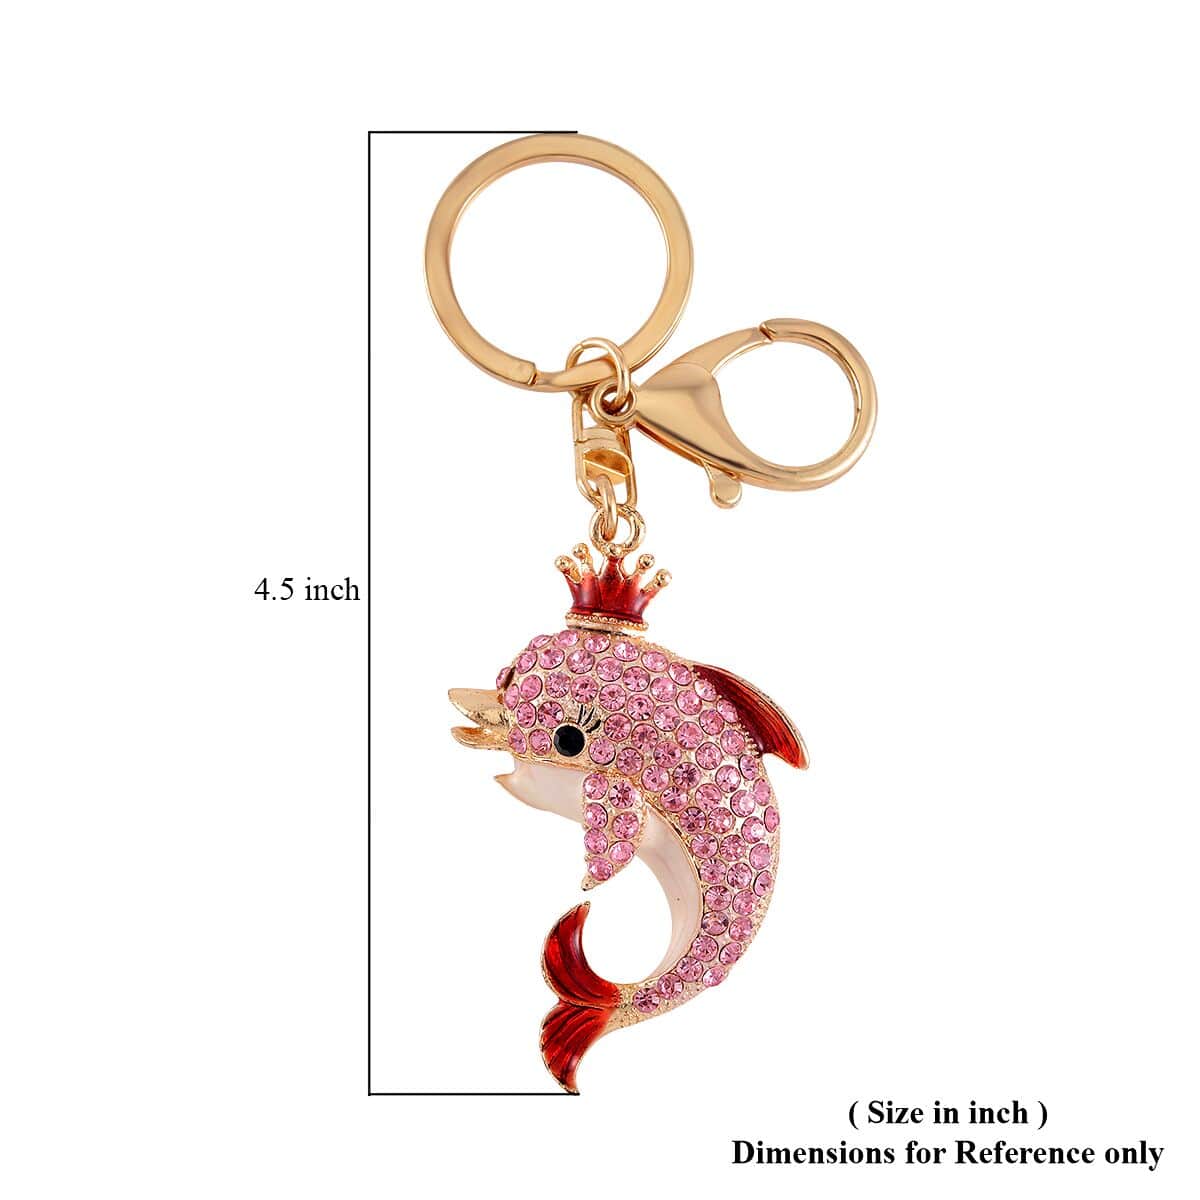 Pink Resin, Multi Austrian Crystal Bracelet (7-9In) in Silvertone with Enameled Dolphin Keychain in Goldtone image number 6